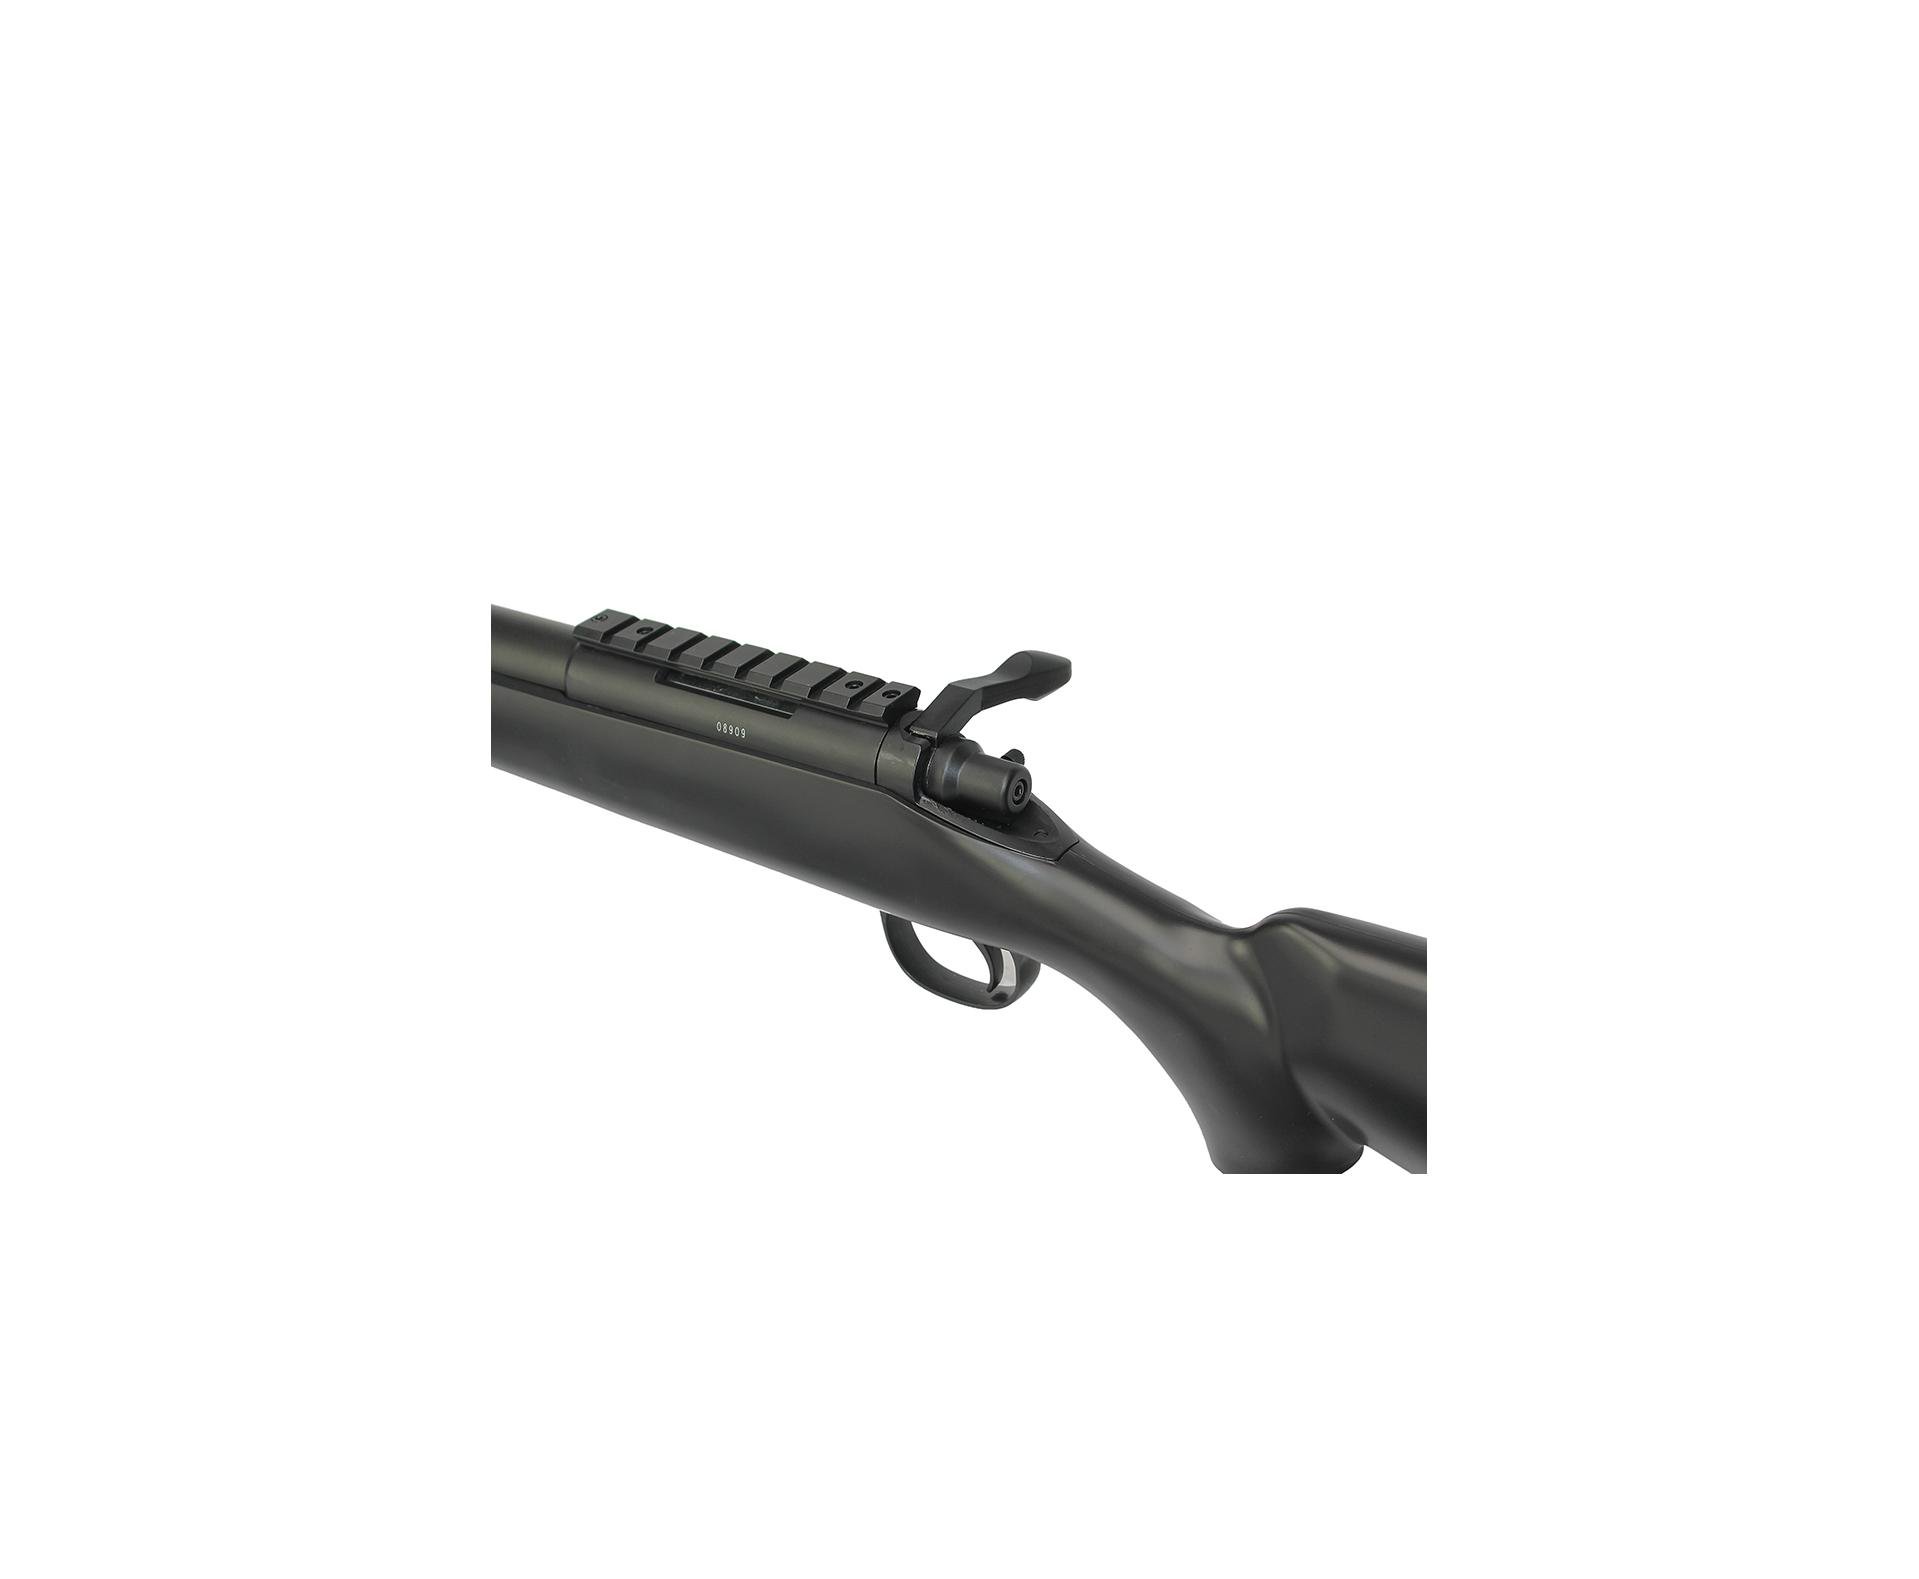 Rifle Airsoft Sniper Spring Vsr-10 Mb-07a Black 6,0mm Well